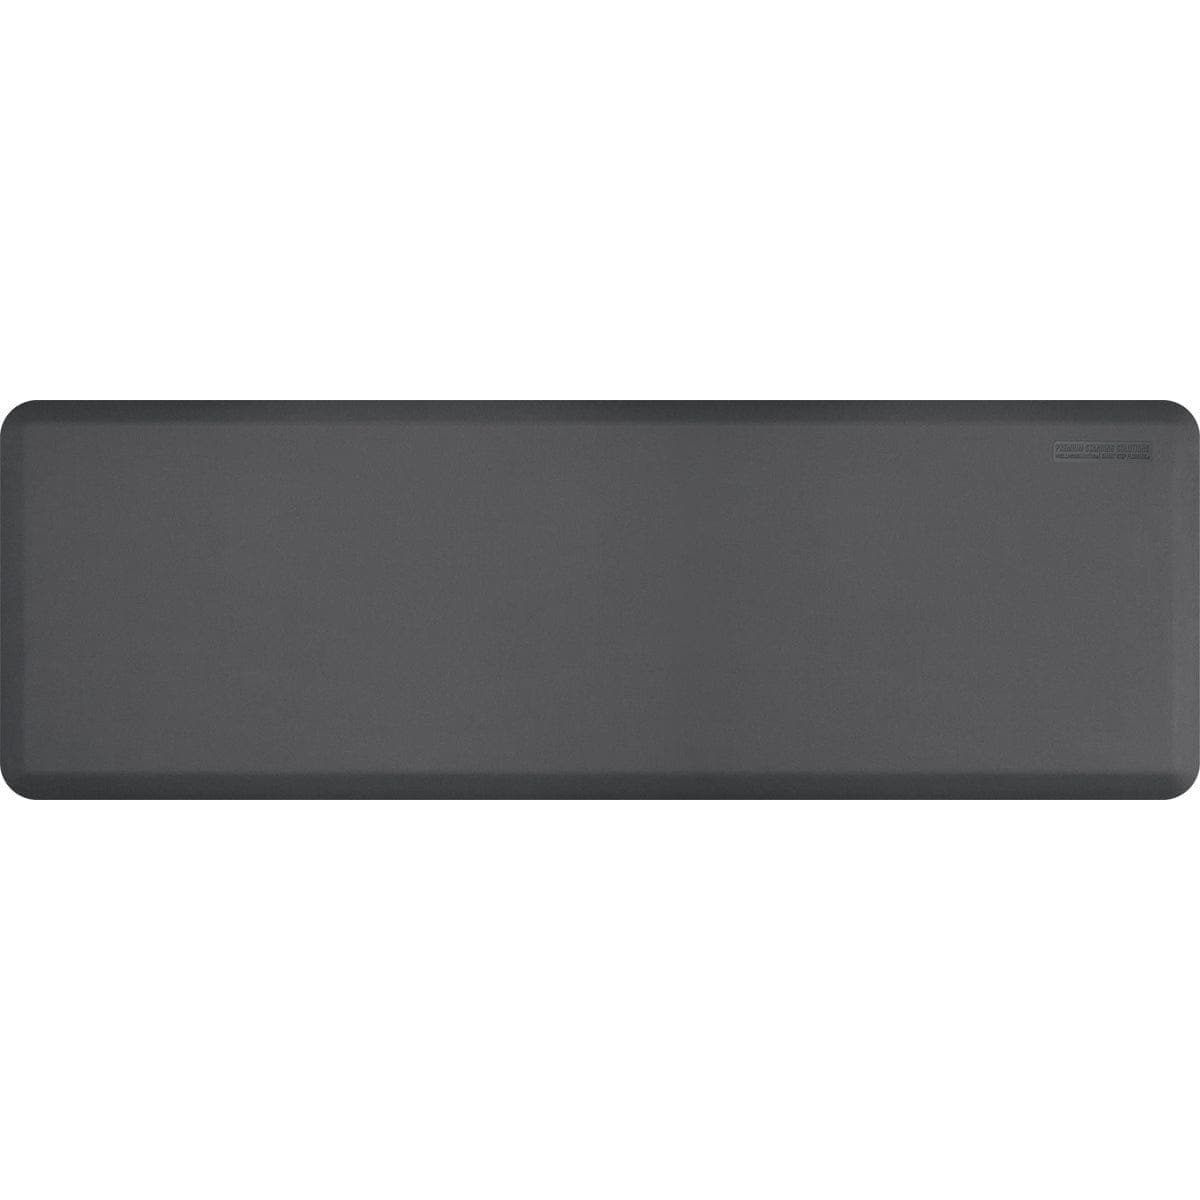 WellnessMats All WellnessMats WellnessMats Original Collection - Gray